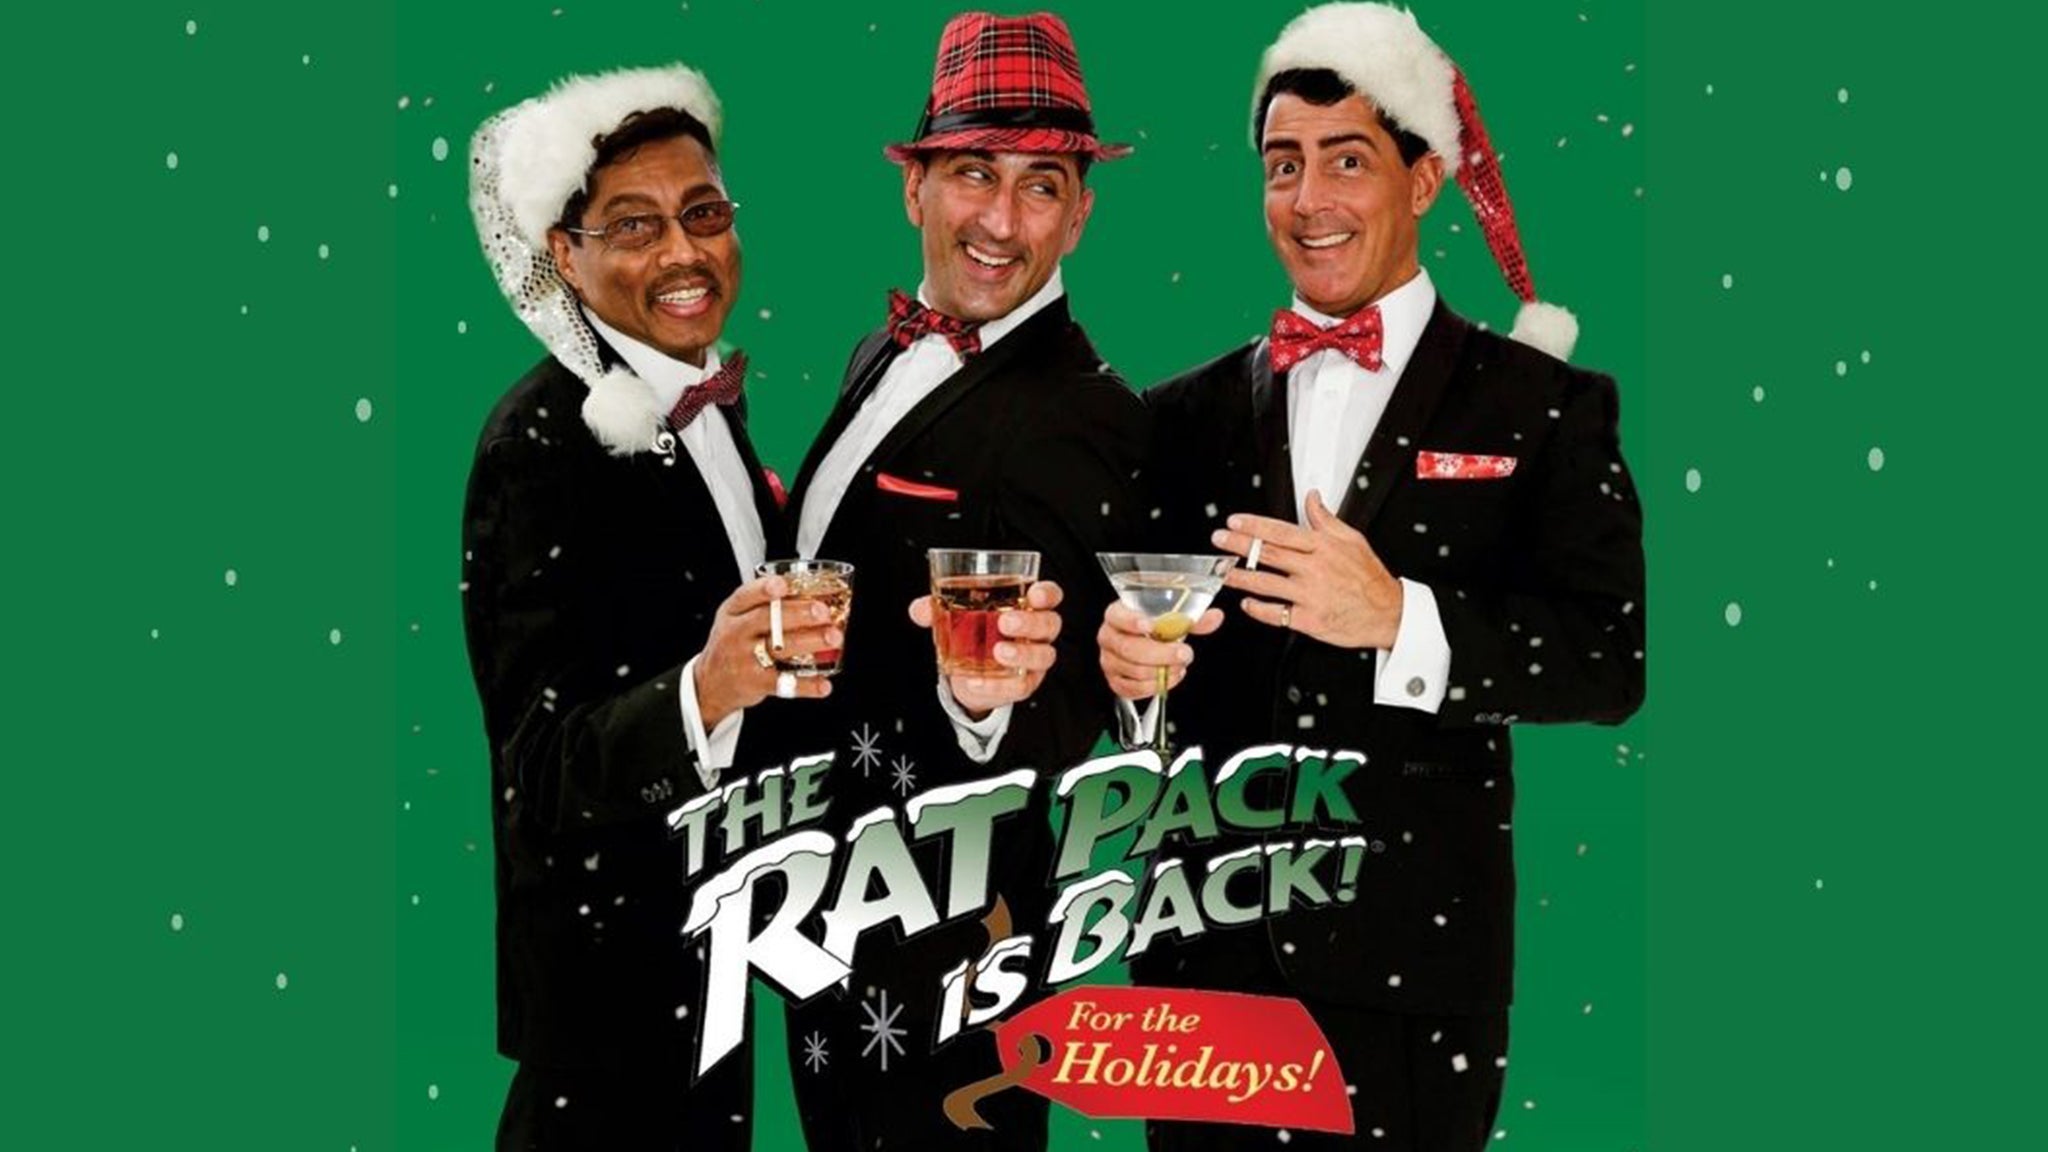 The Rat Pack is Back for The Holidays! in Elkhart promo photo for Venue presale offer code